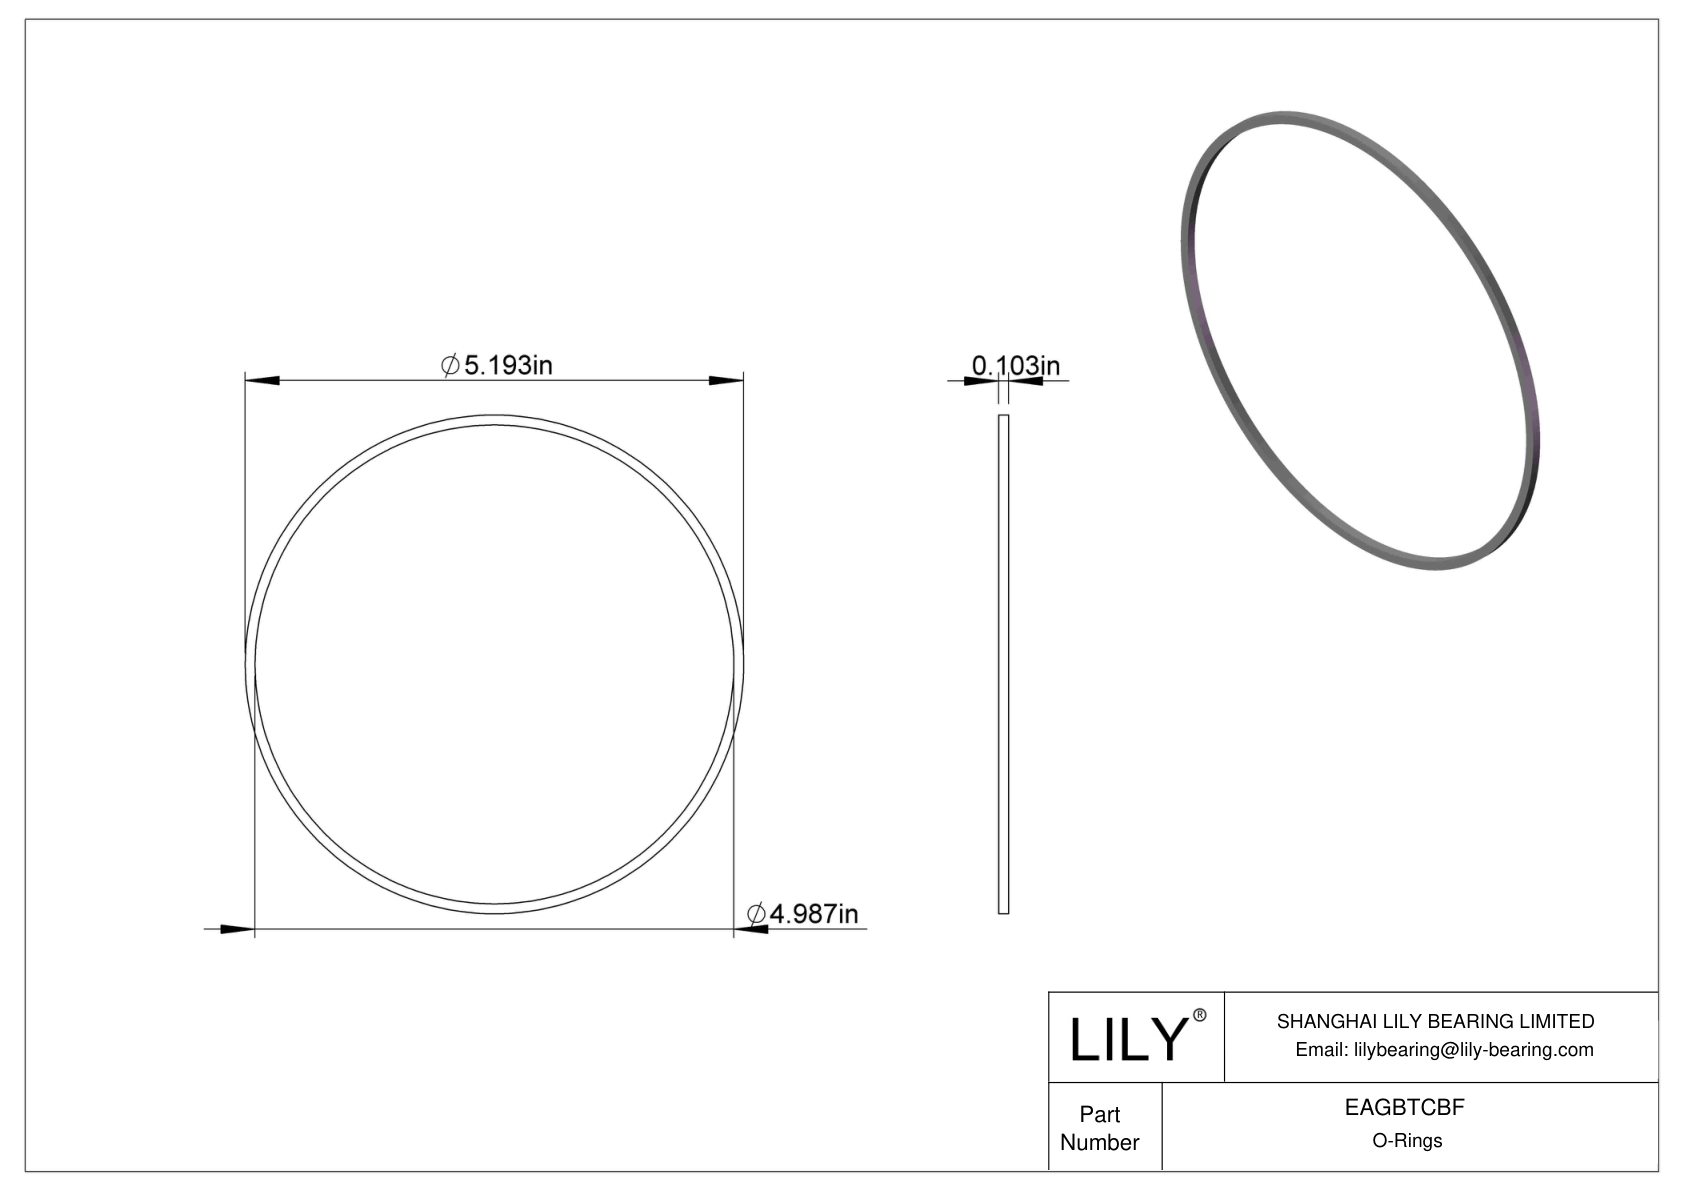 EAGBTCBF Oil Resistant O-Rings Square cad drawing